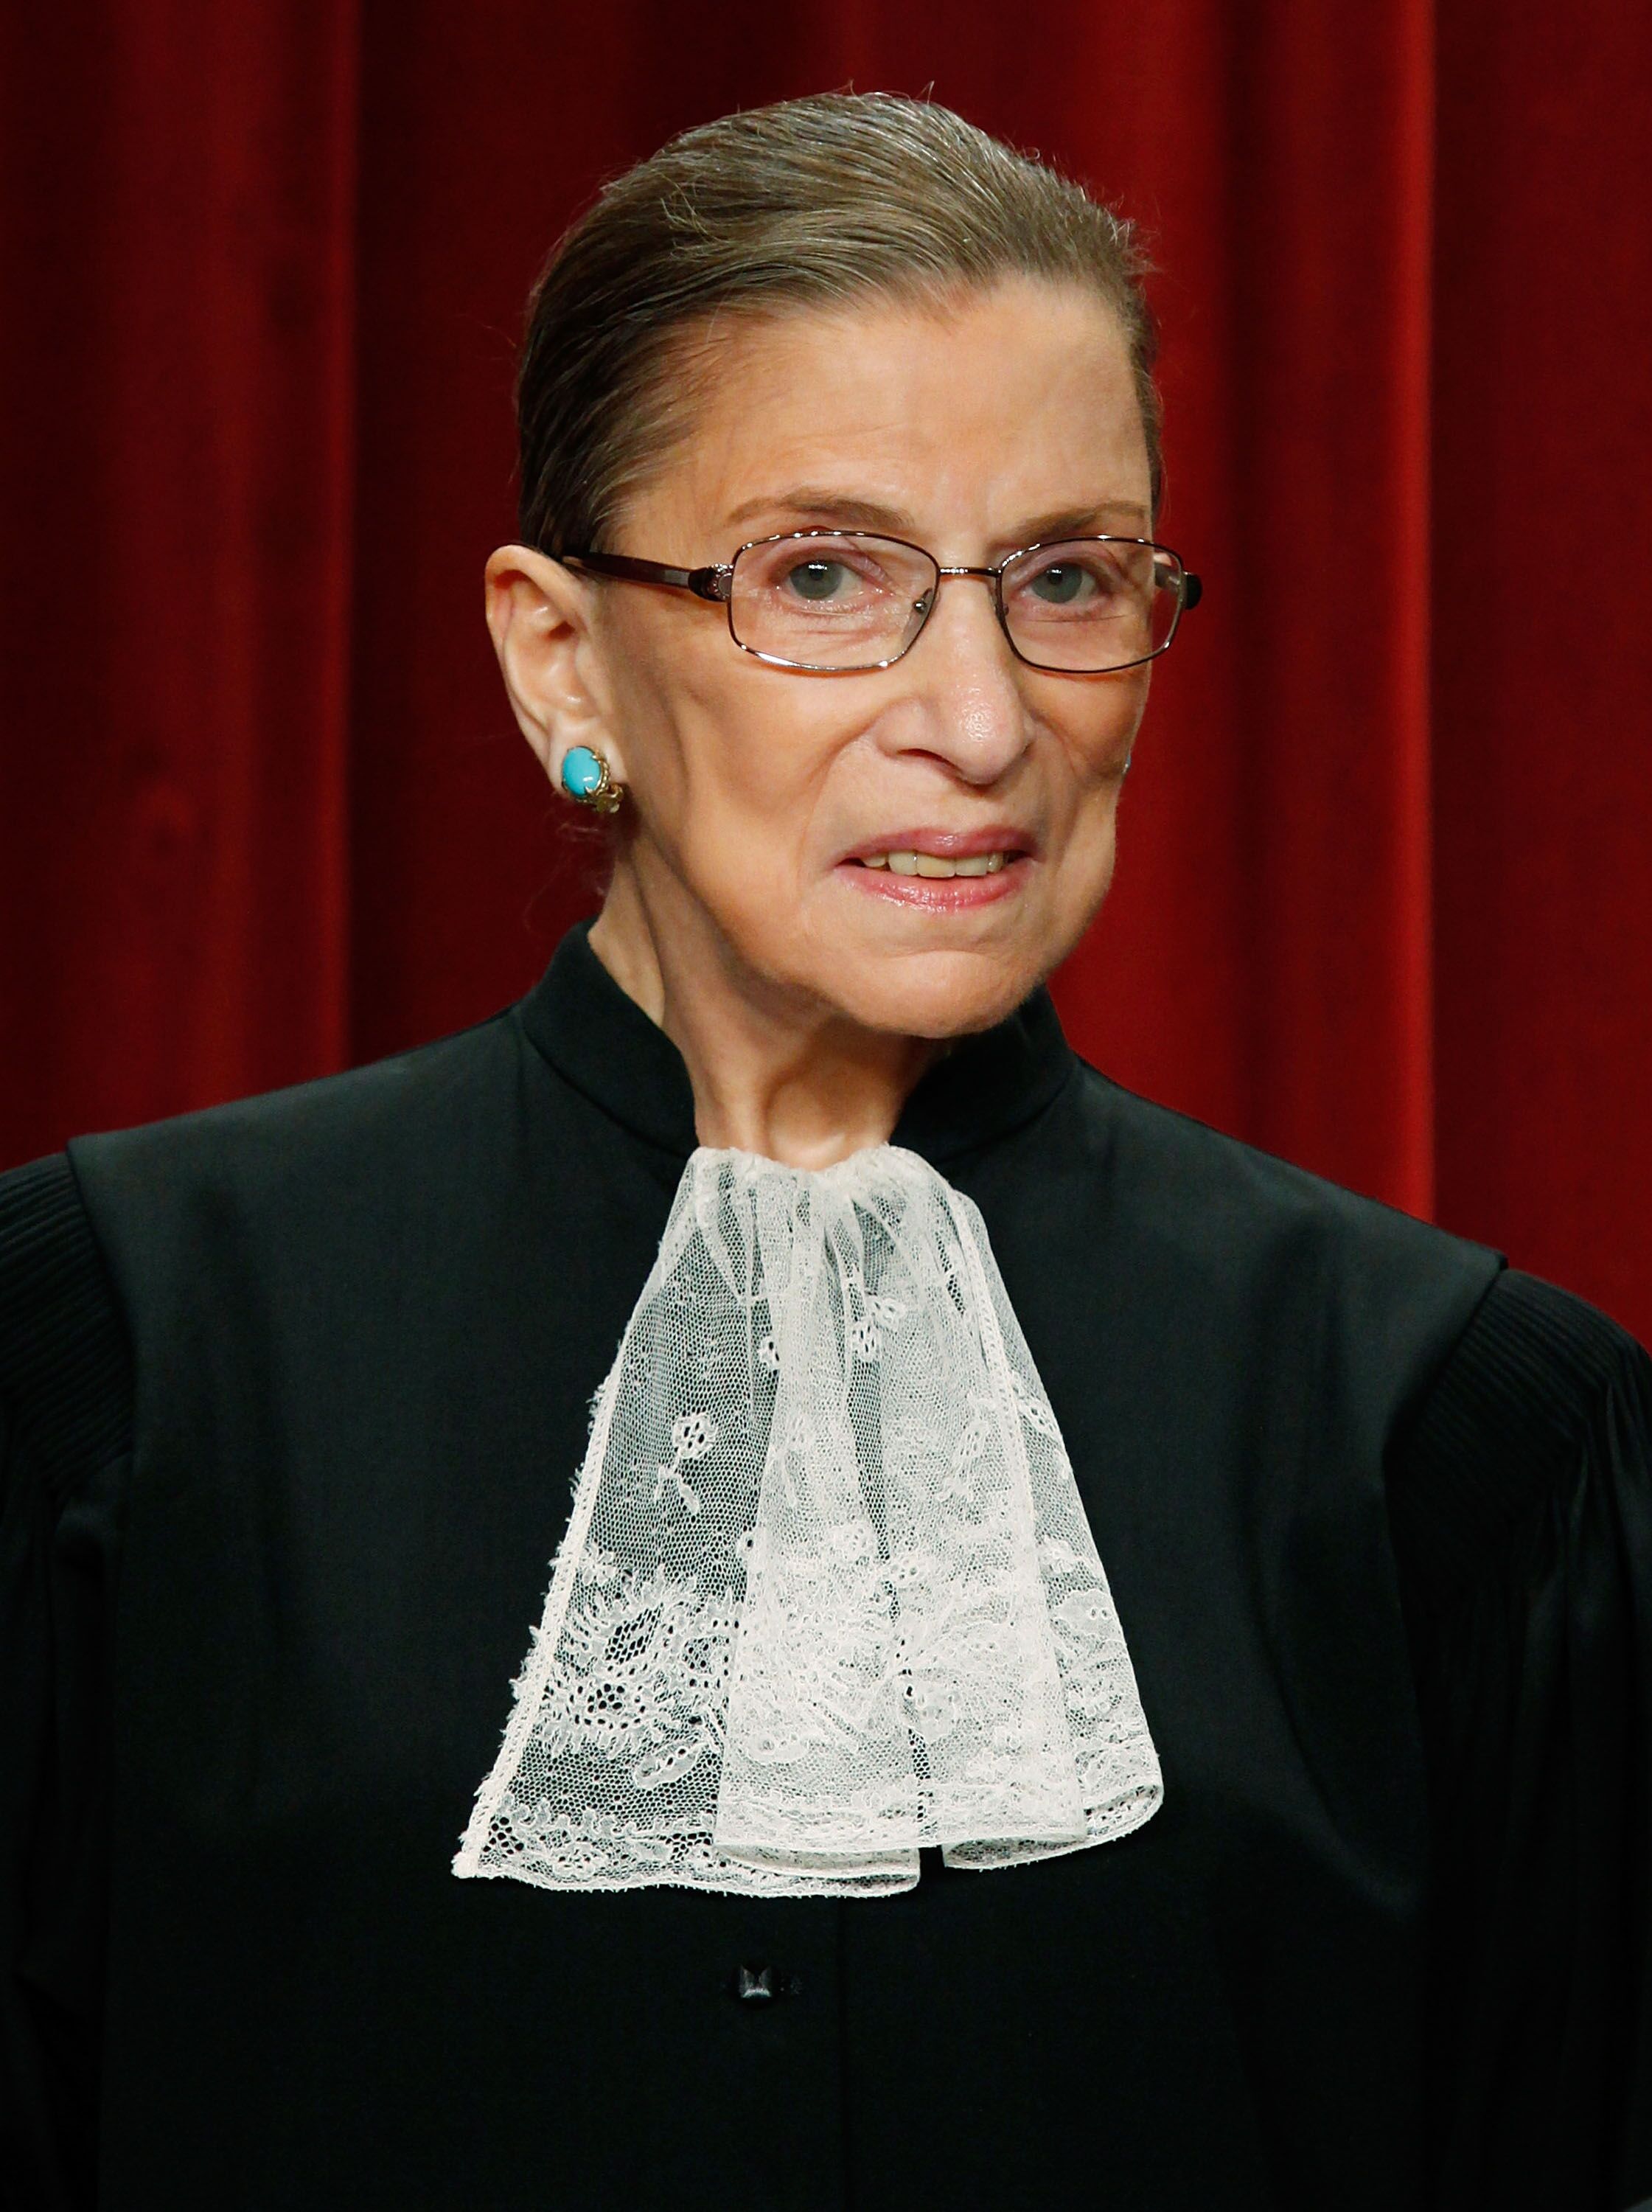 Associate Justice Ruth Bader Ginsburg poses during a group photograph at the Supreme Court. | Source: Getty Images